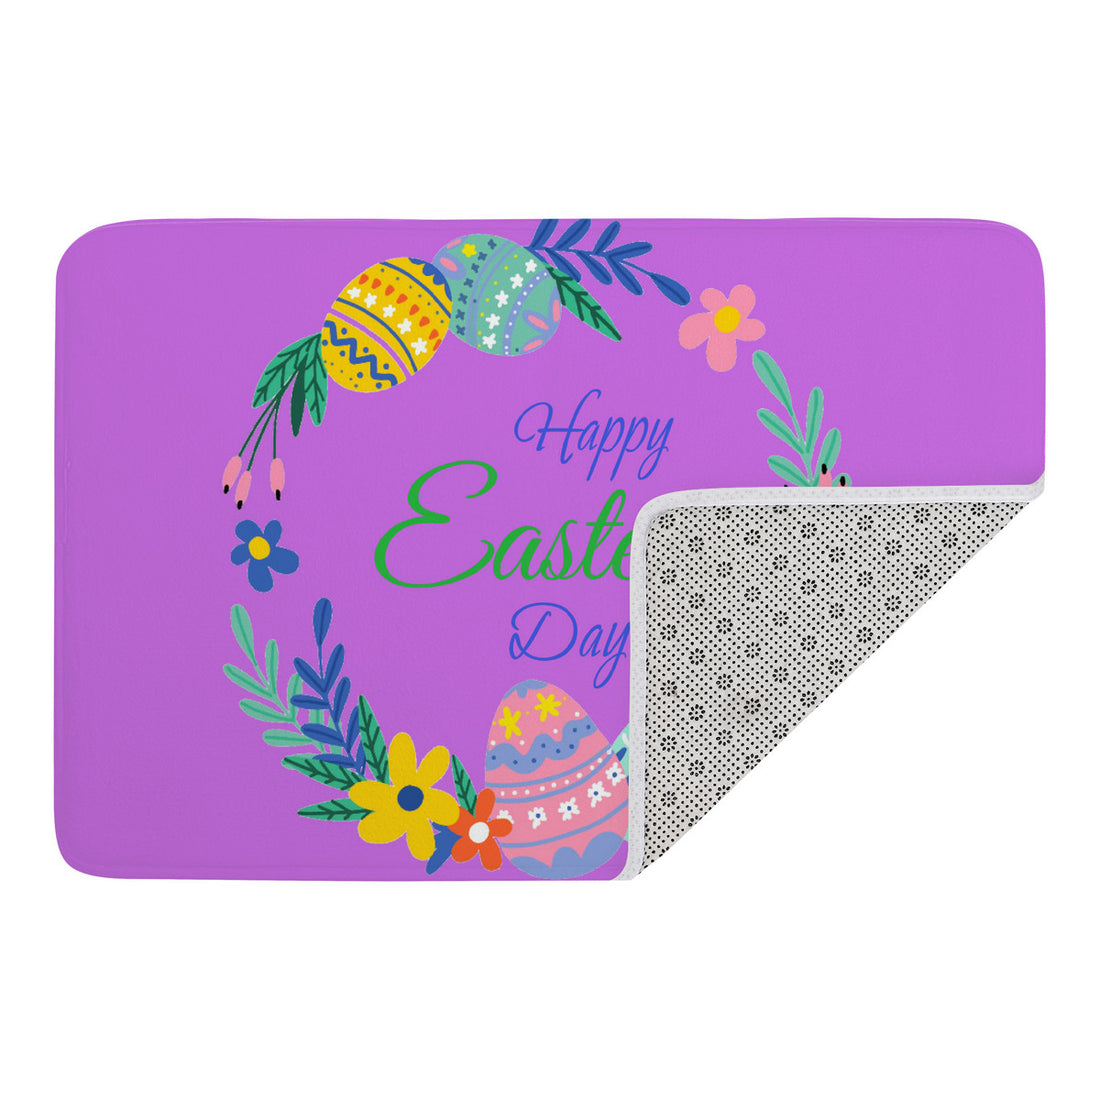 Happy Easter Day Doormat Pink Home-clothes-jewelry